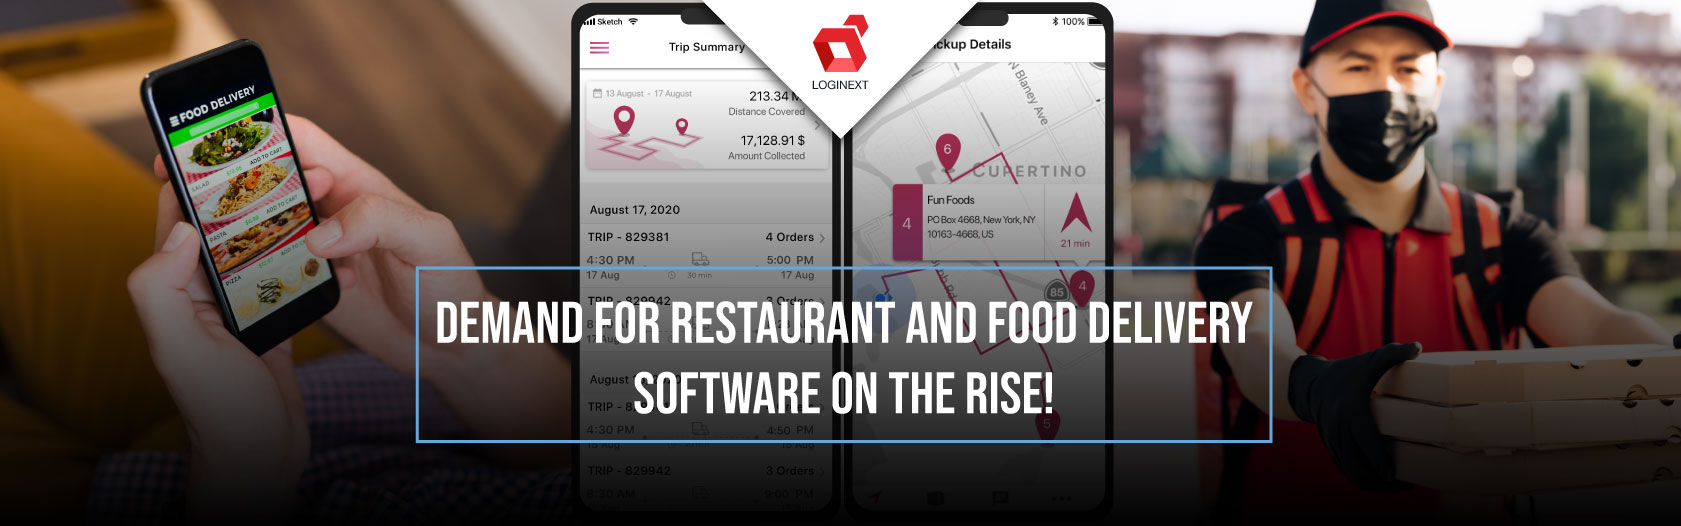 Demand for food delivery software on the rise